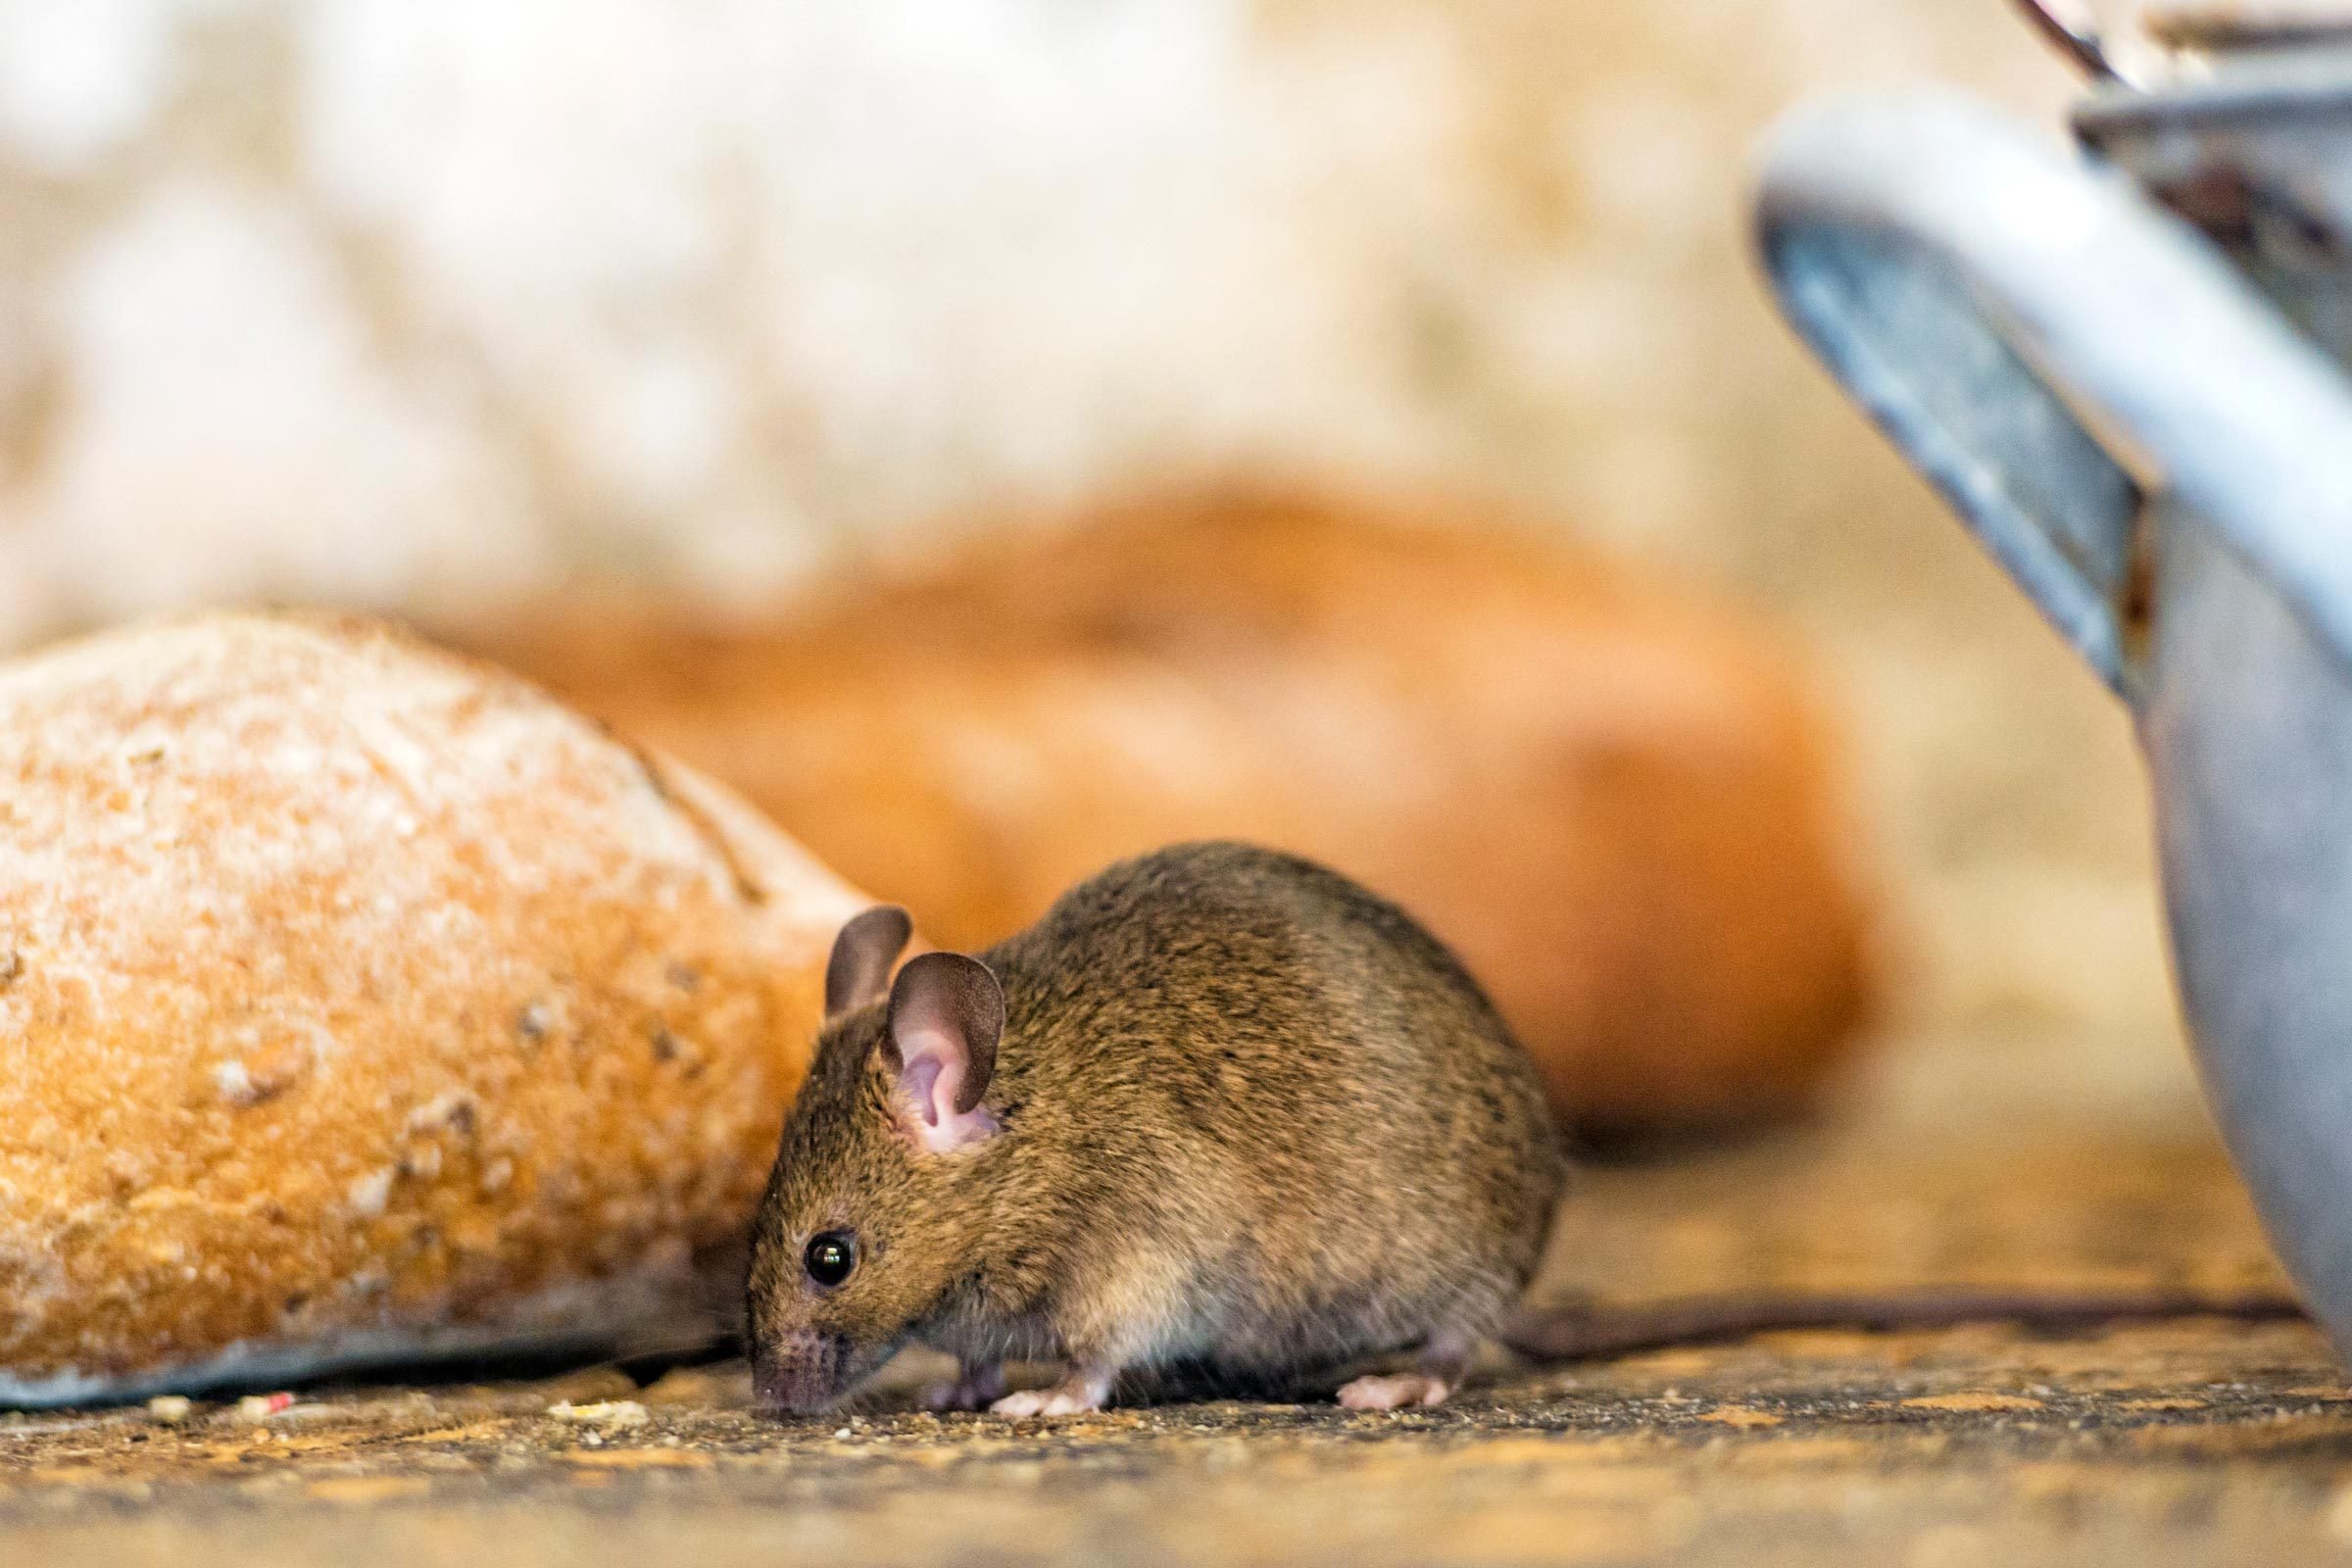 Try This Easy Trick to Stop Mice from Entering Your Home